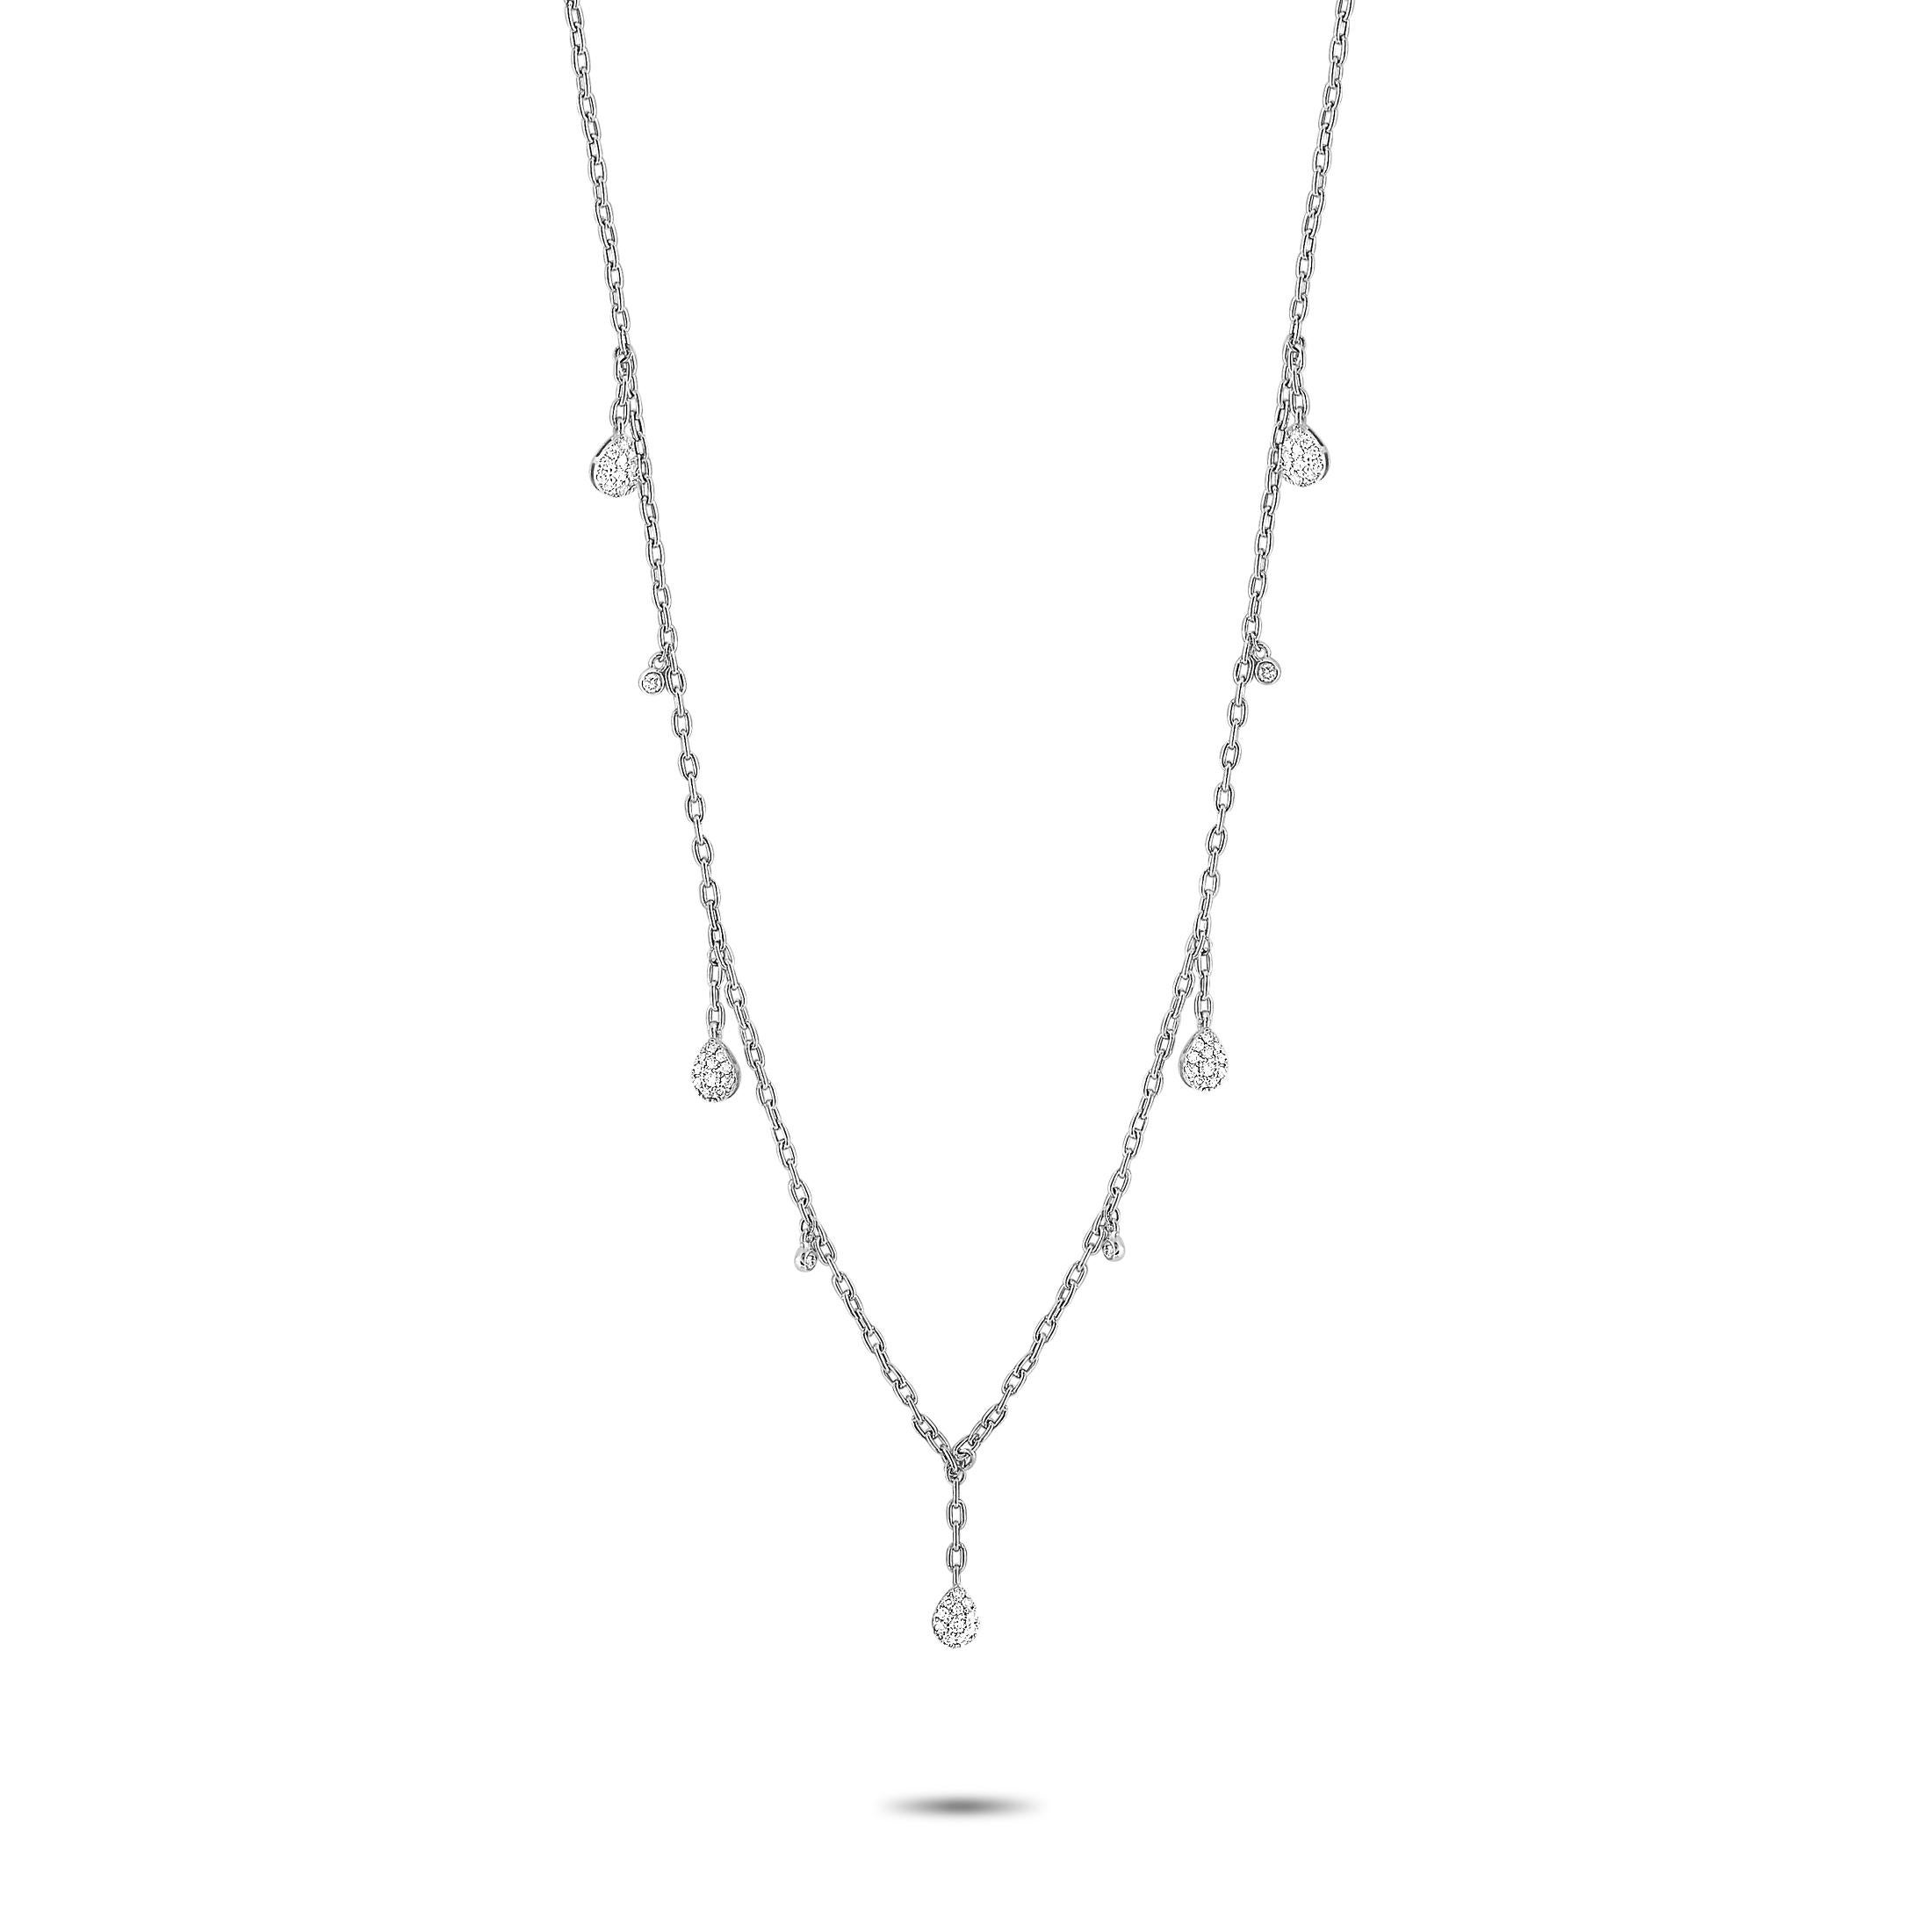 This LB Exclusive necklace is made of 18K white gold and embellished with diamonds that amount to 1.00 carat. The necklace weighs 3.9 grams and measures 18” in length.
 
 Offered in brand new condition, this jewelry piece includes a gift box.
